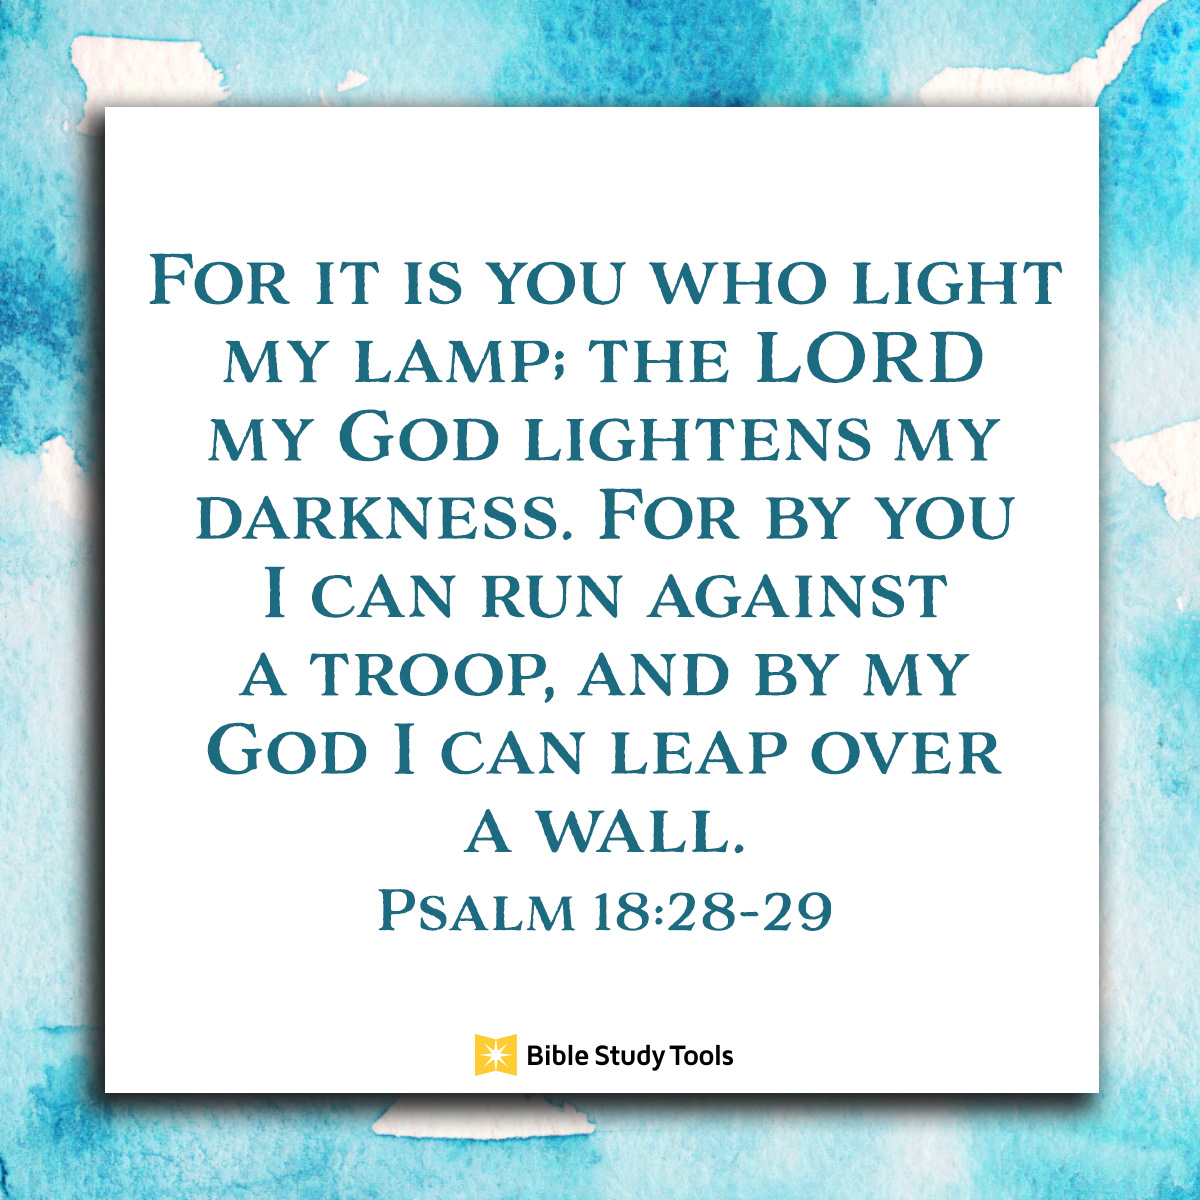 Not Our Strength But The Lord S Psalm 18 28 29 Your Daily Bible Verse October 31 Your Daily Bible Verse